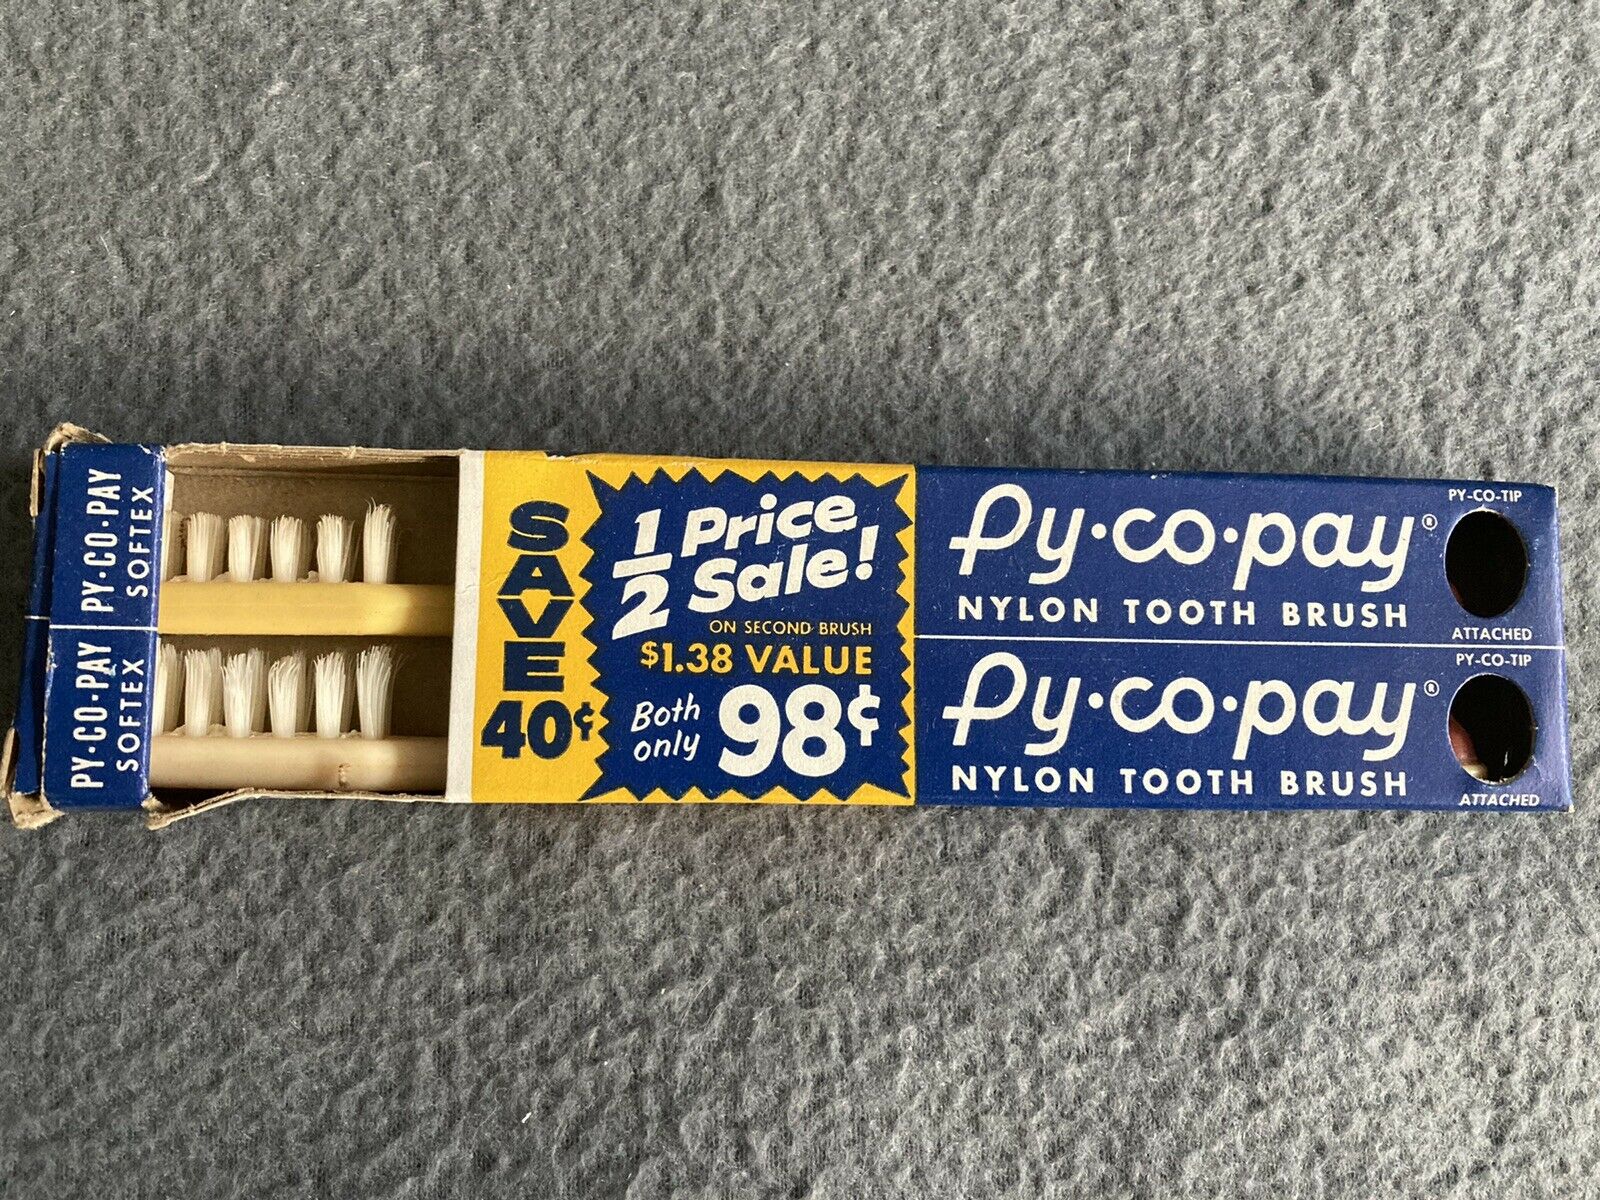 Vintage New Old Stock Pycopay Toothbrush 2 Pack